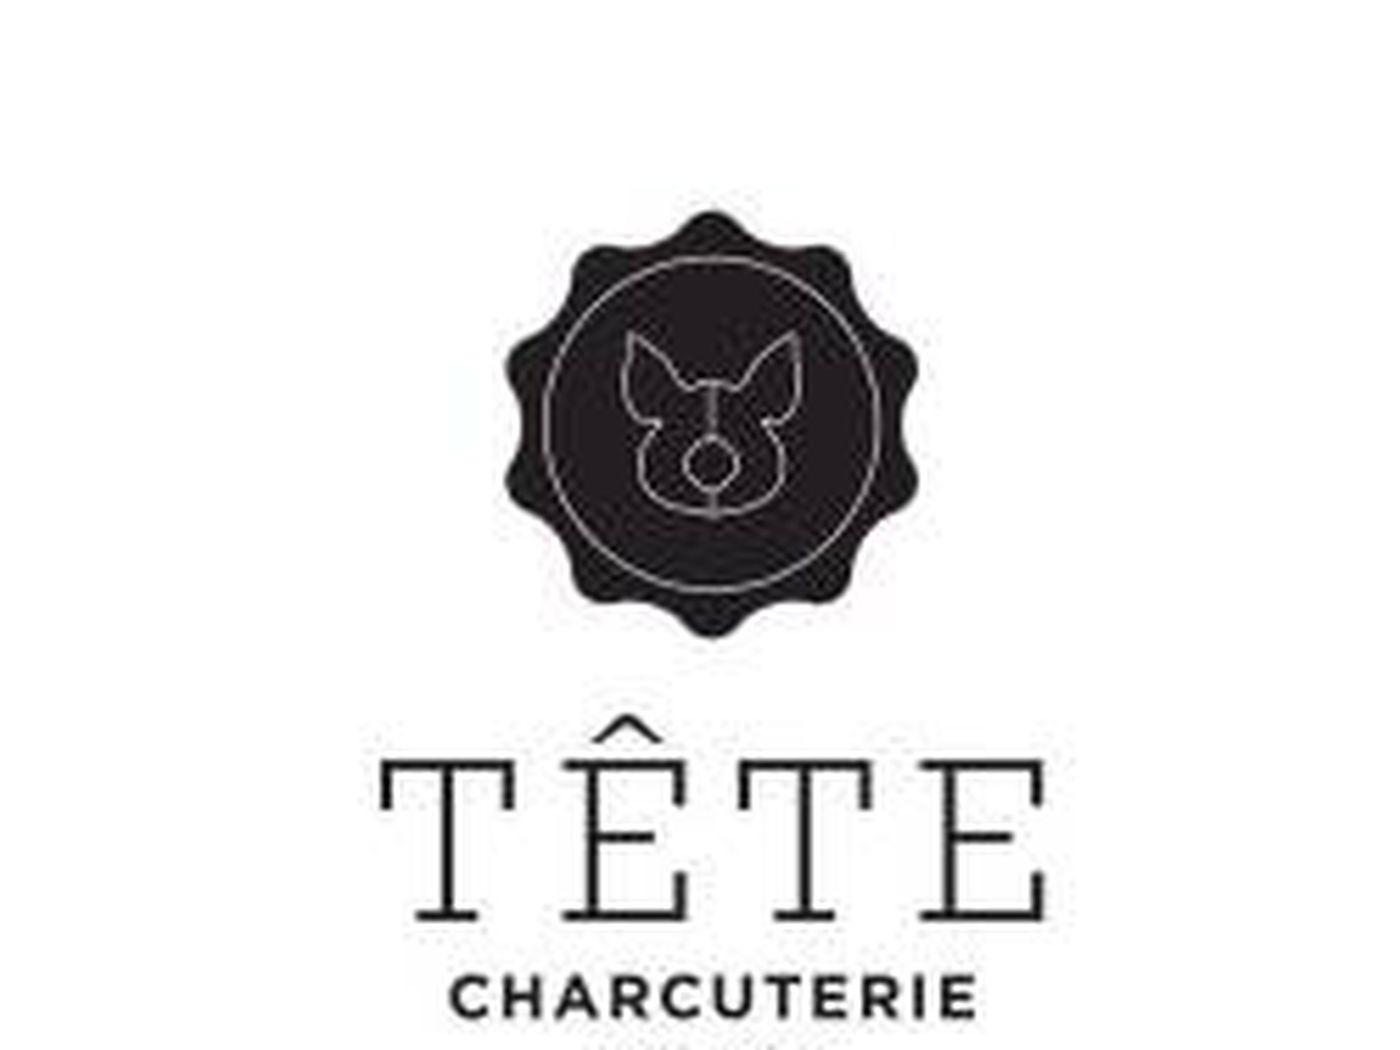 Charcuterie Logo - Details Emerge on Upcoming TÊTE Charcuterie - Eater Chicago